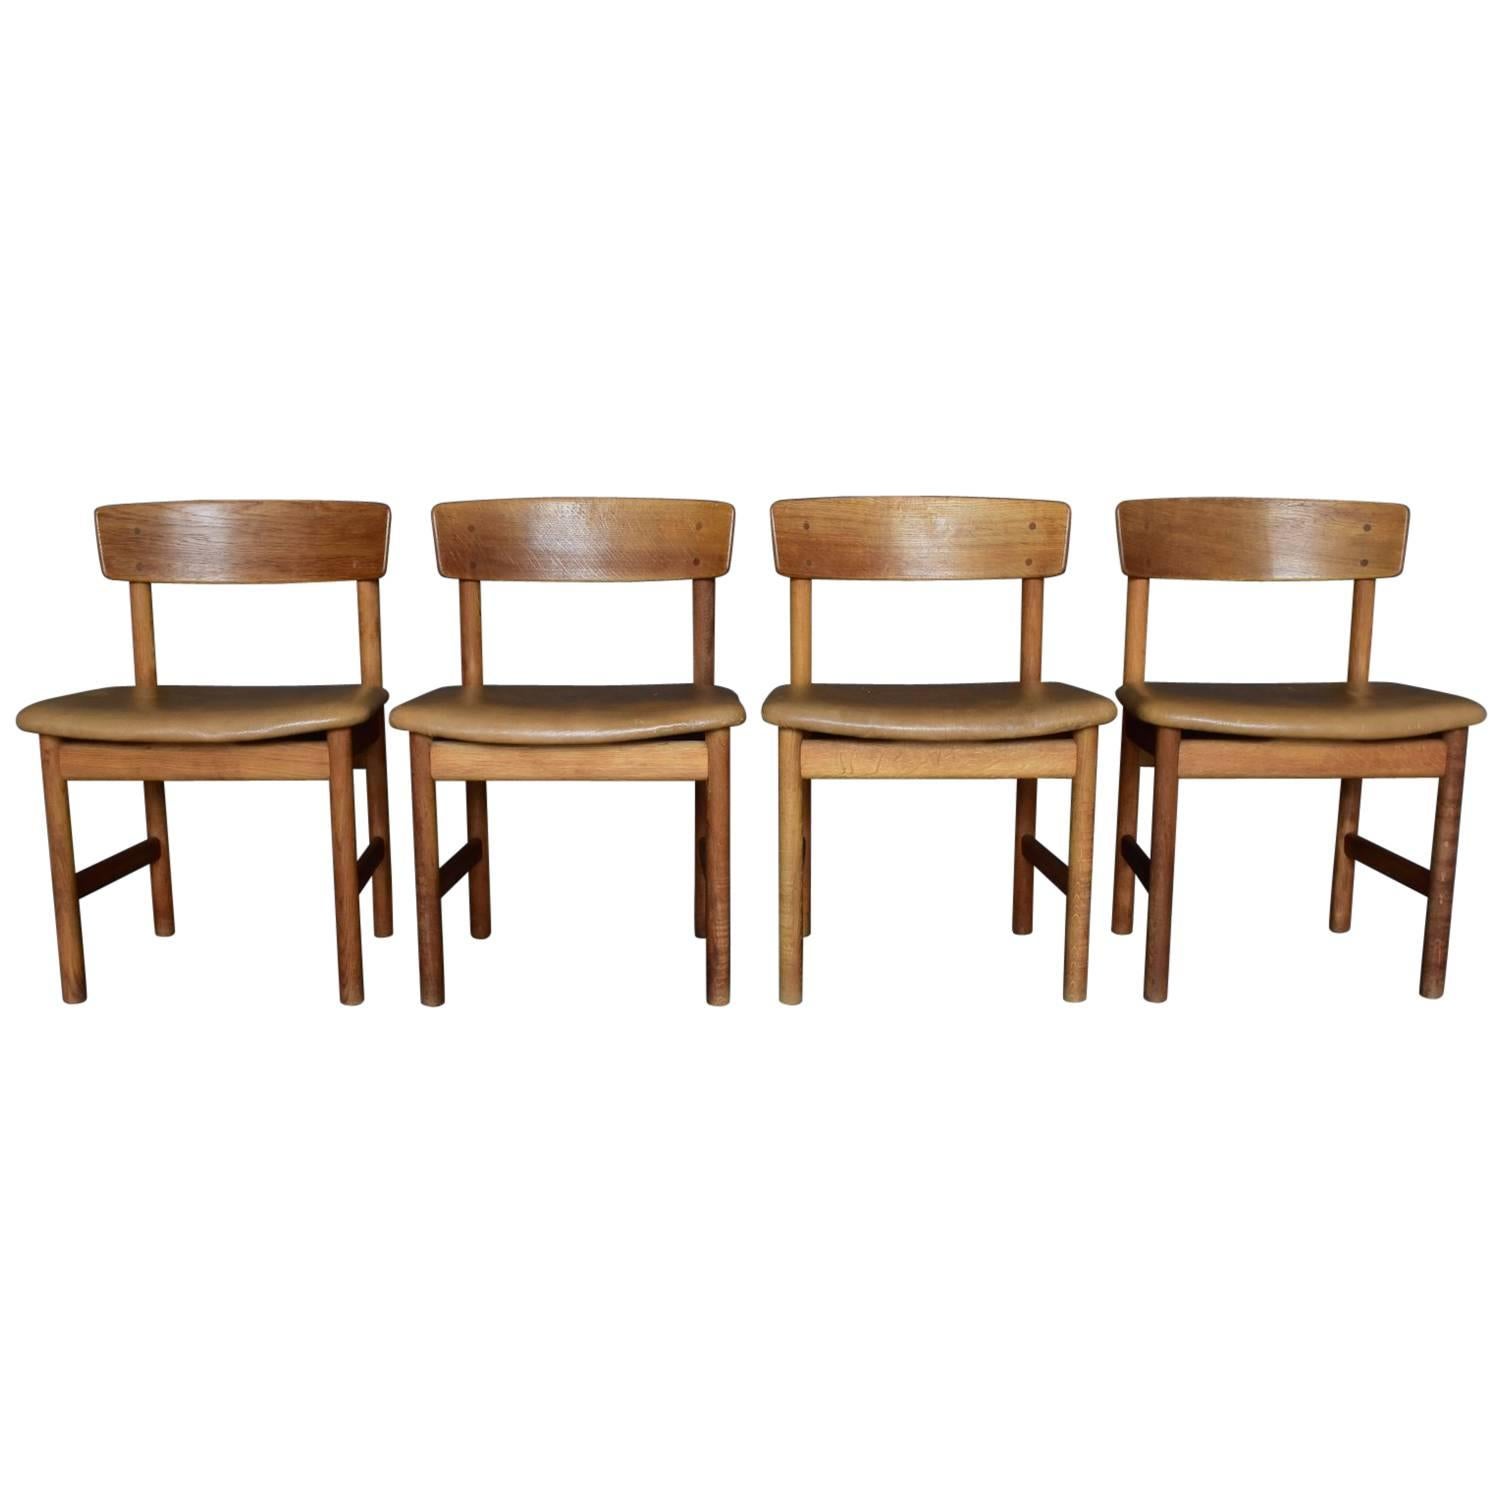 Set of Four Børge Mogensen Chairs, Produced by Fredericia Furniture